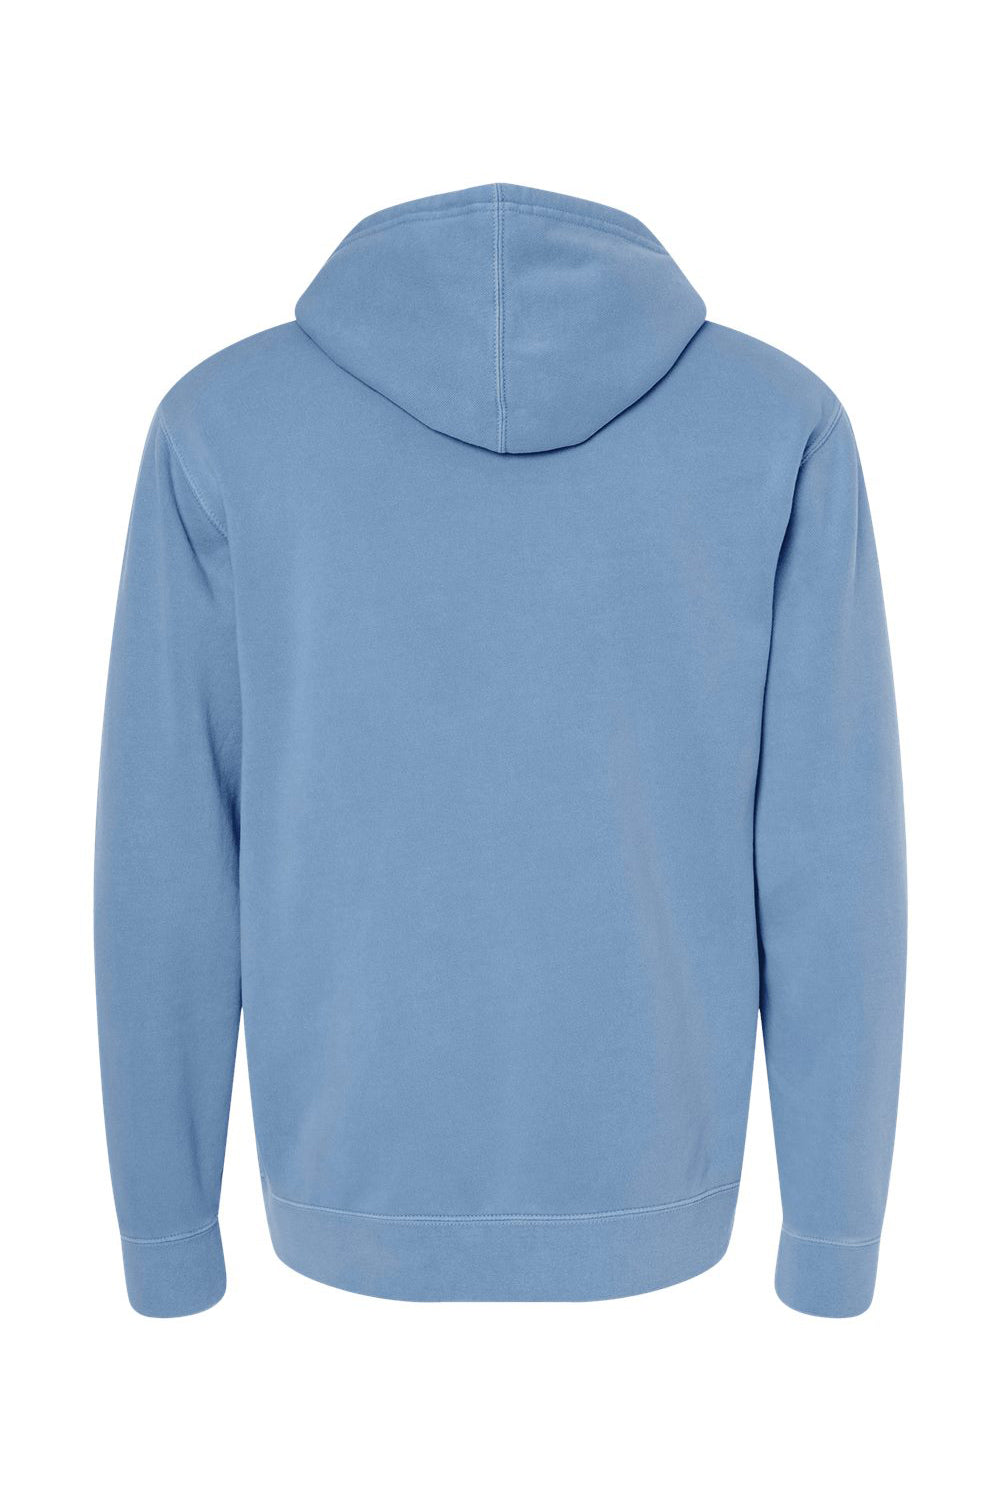 Independent Trading Co. PRM4500 Mens Pigment Dyed Hooded Sweatshirt Hoodie Light Blue Flat Back